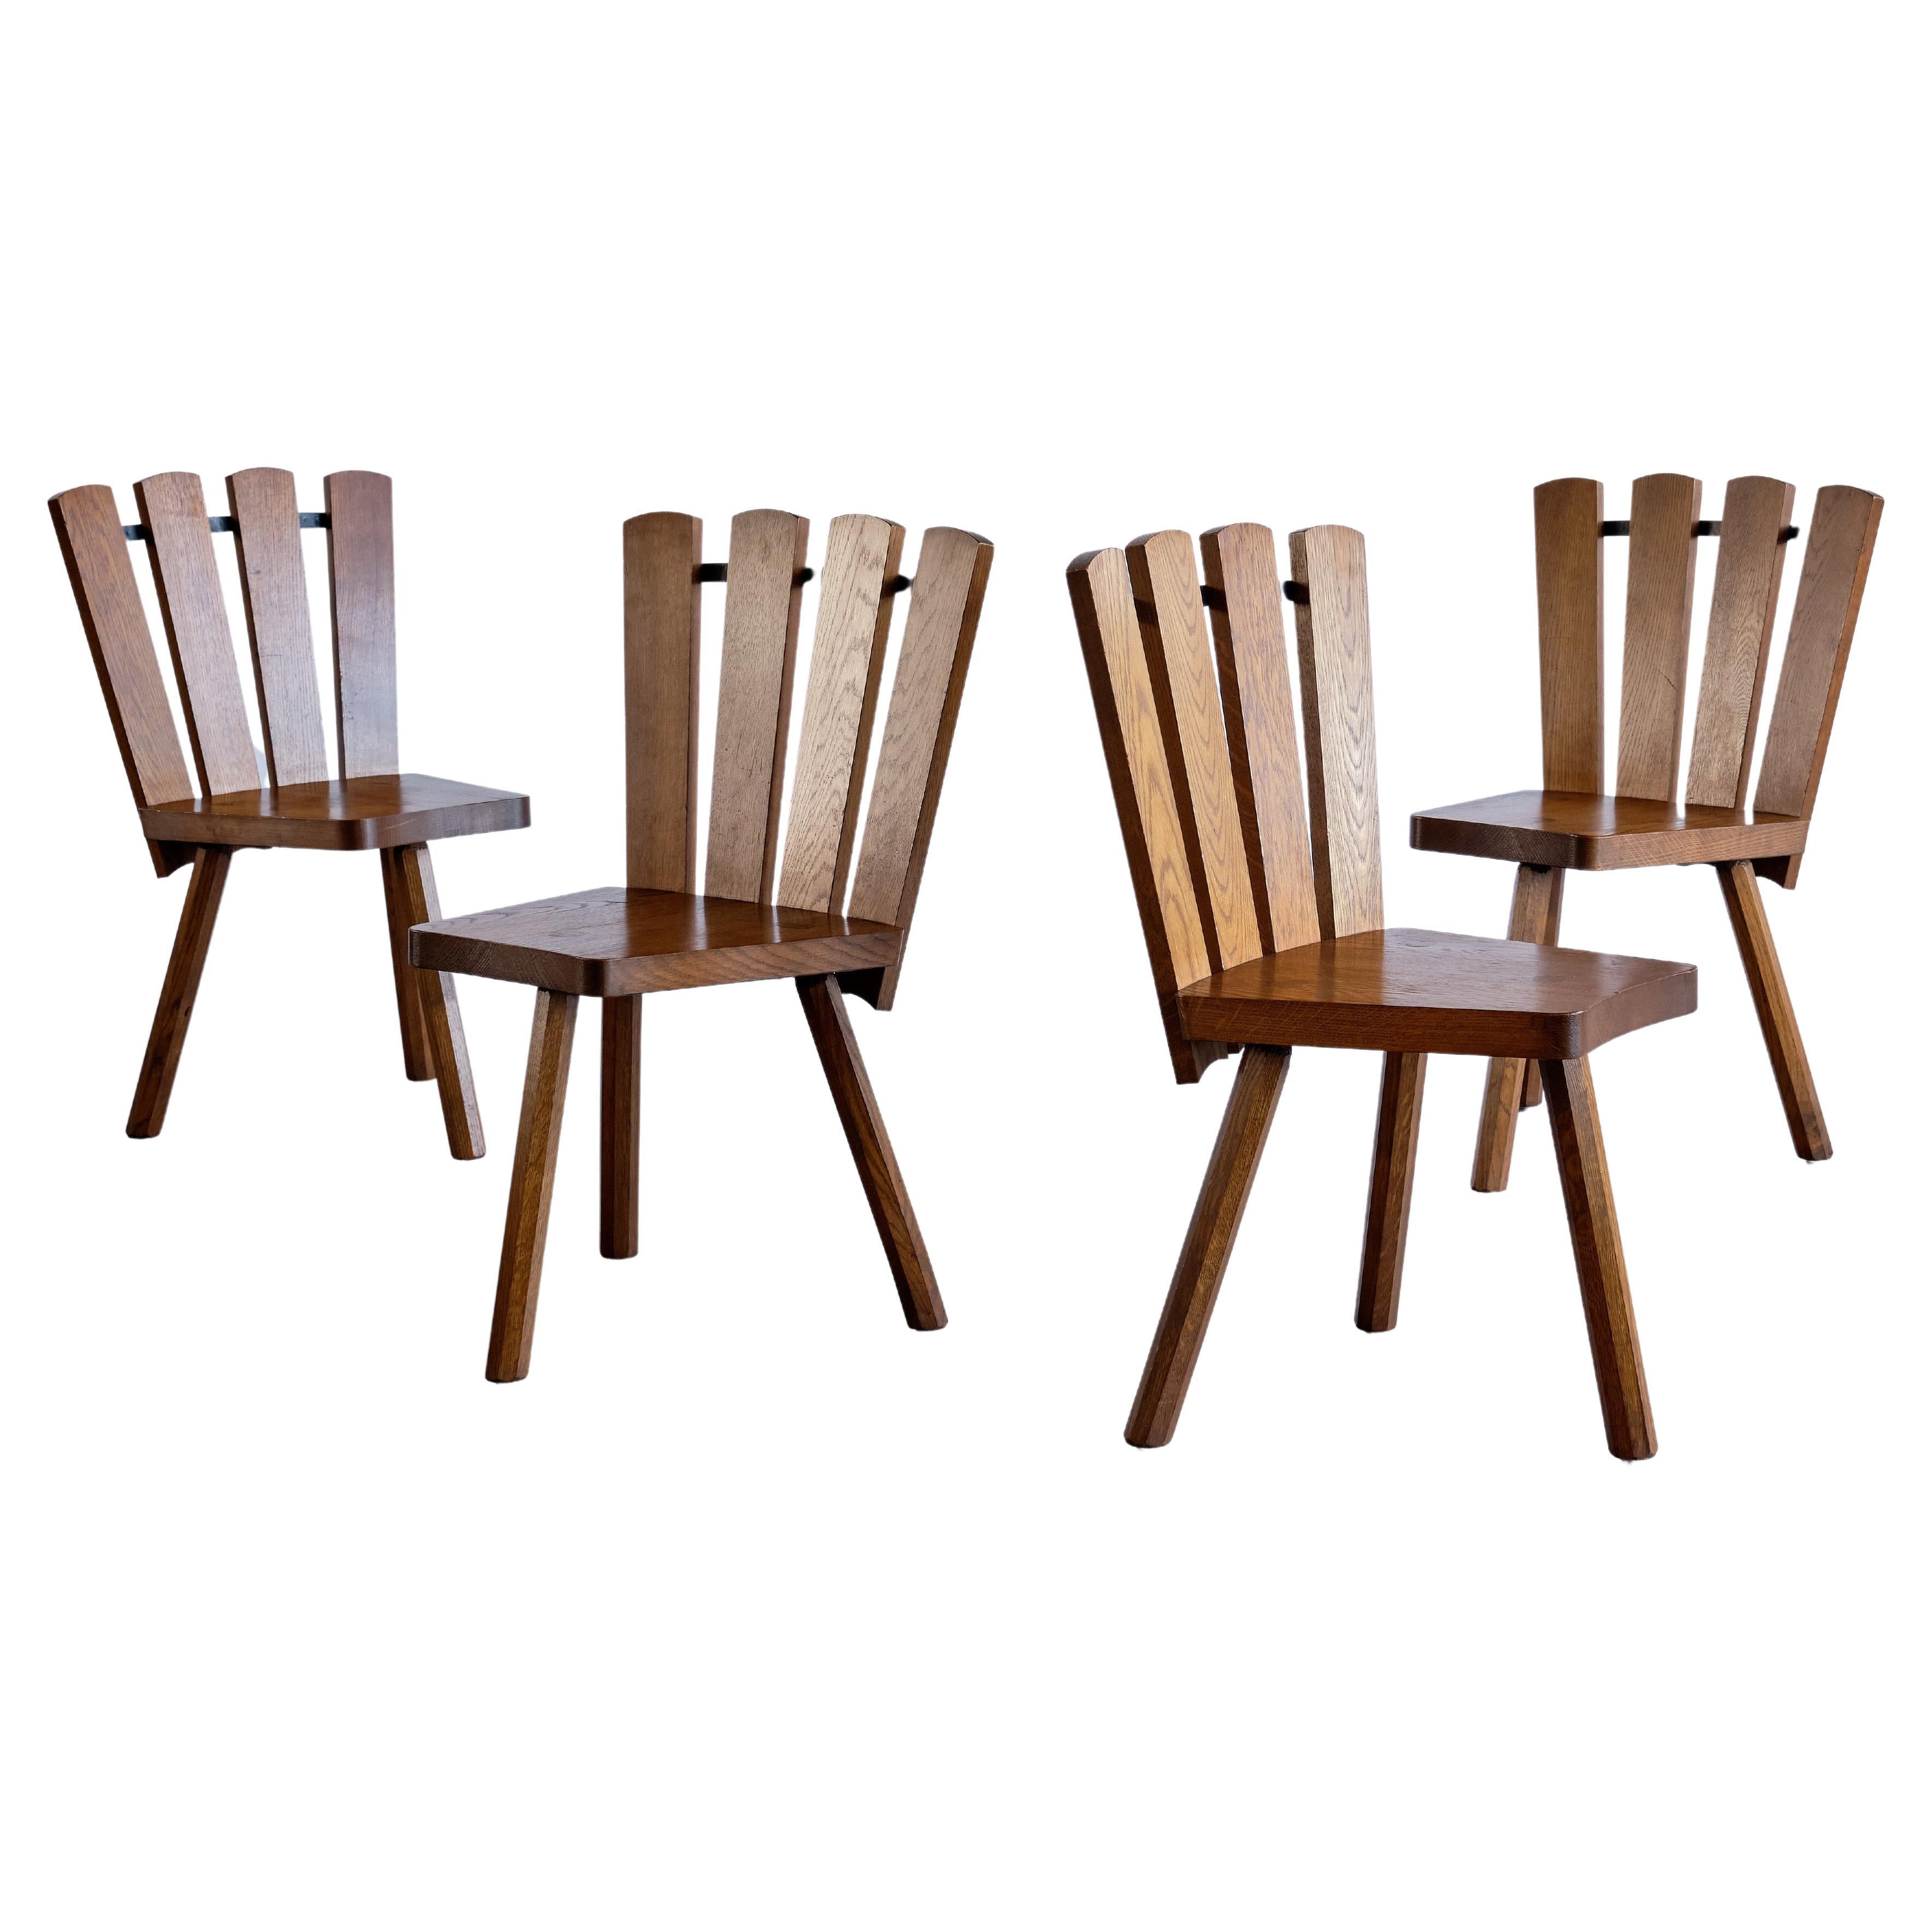 Set of Four French Modern Tripod Oak Dining Chairs with Fan Shaped Back, 1950s For Sale